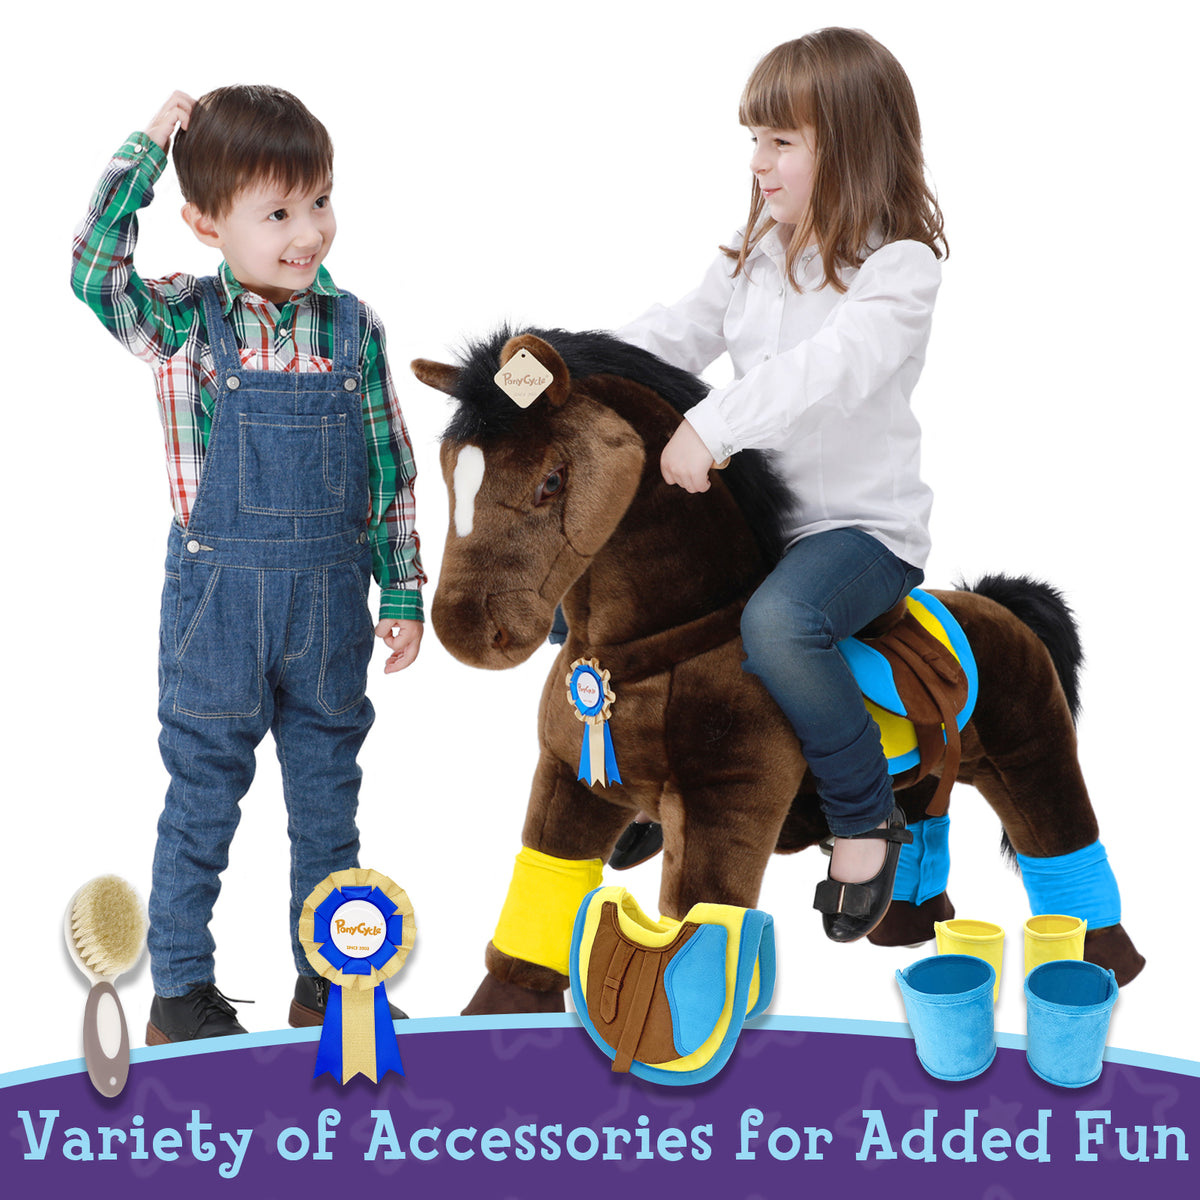 PonyCycle K Dark Brown Horse for Age 3-5 (Accessories included)